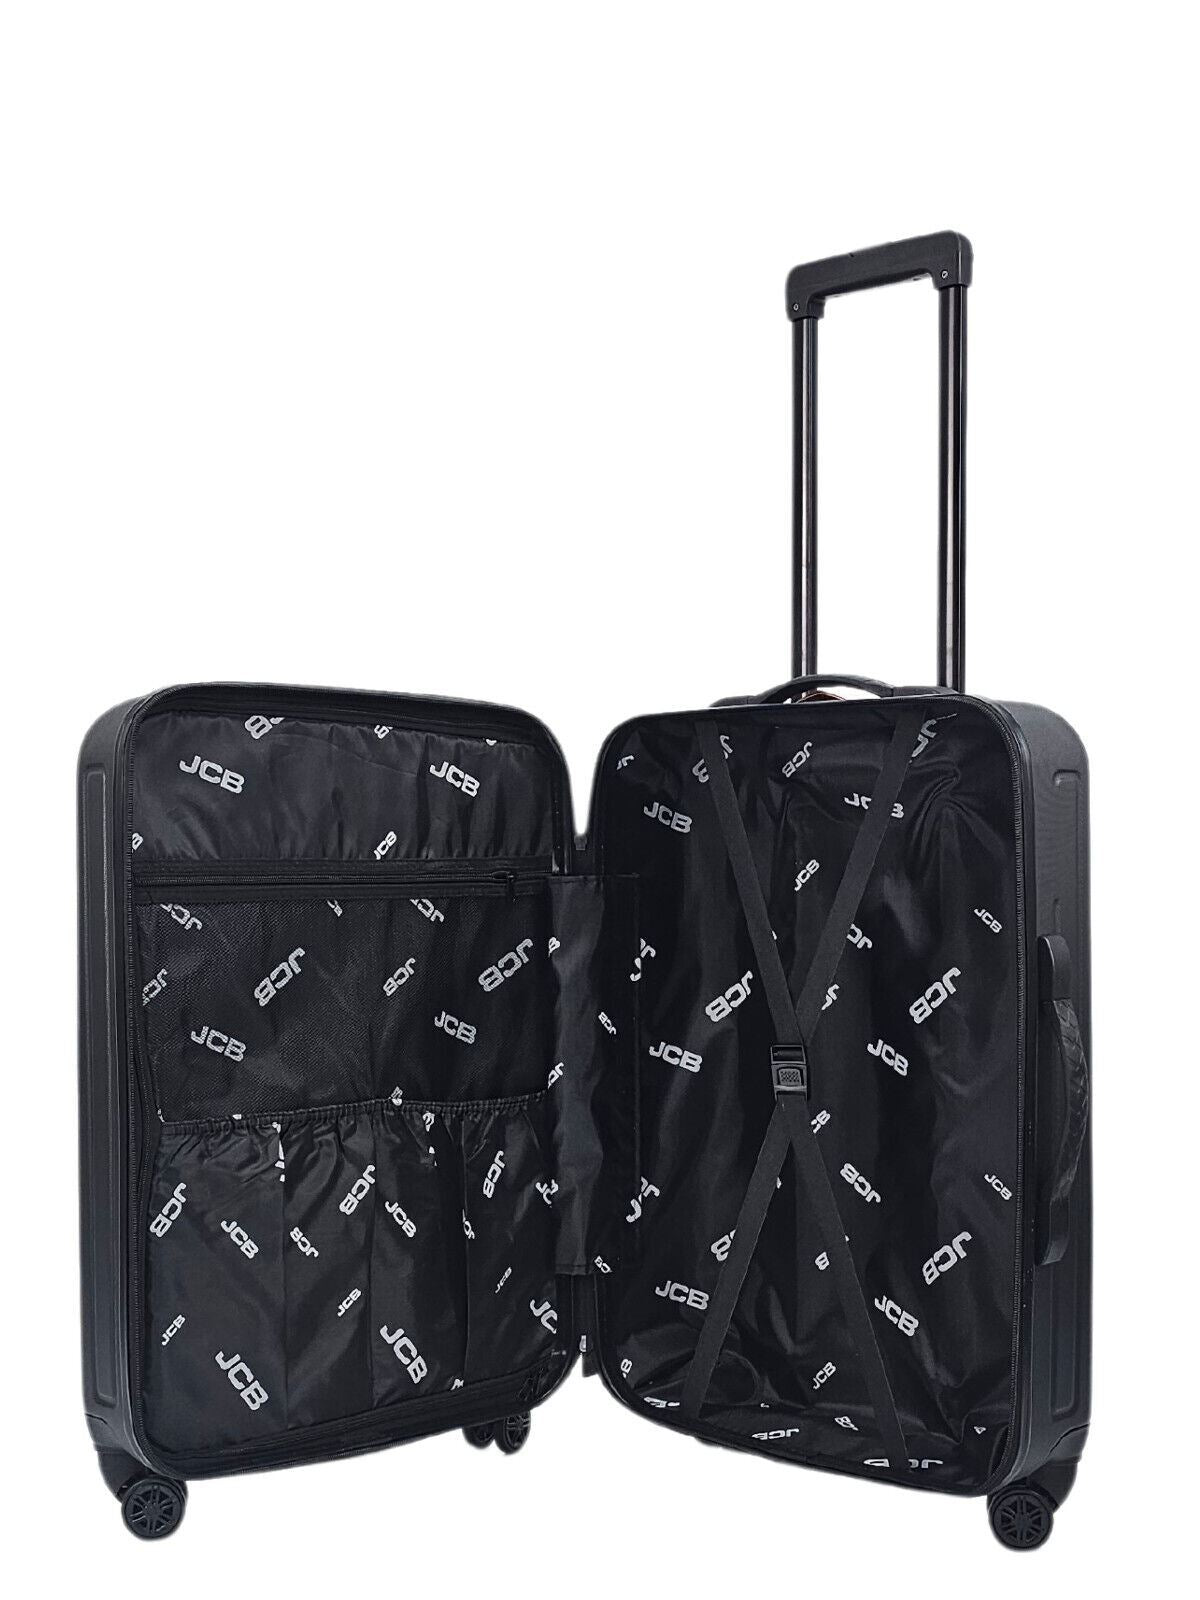 Black Hard Shell Suitcase Set Luggage Travel Trolley Cabin Cases Lightweight Bag